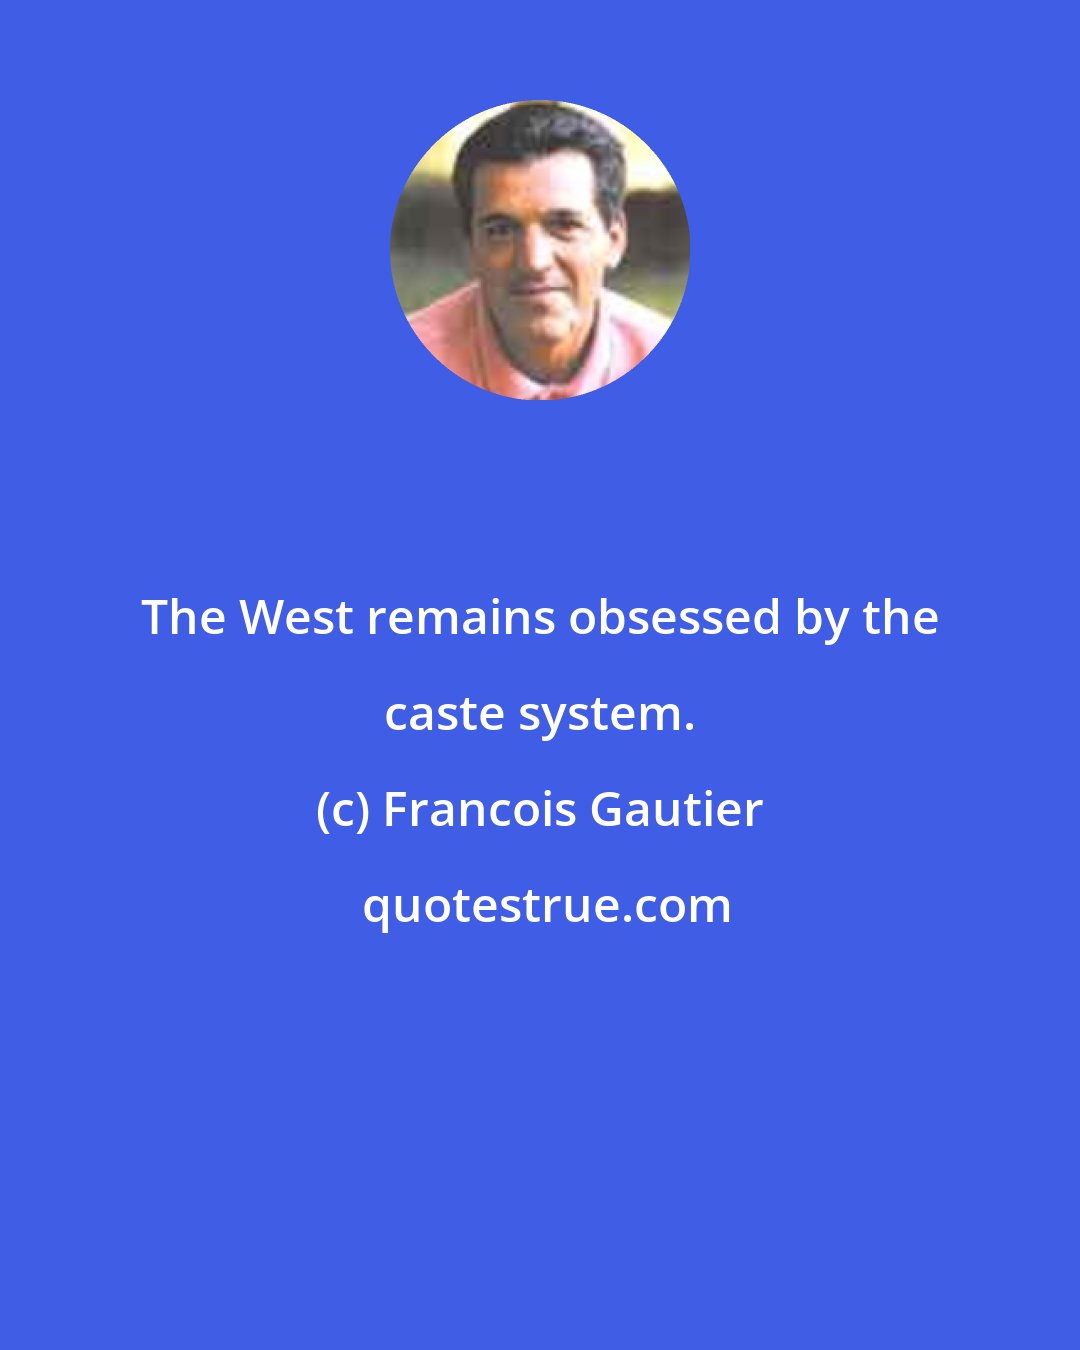 Francois Gautier: The West remains obsessed by the caste system.